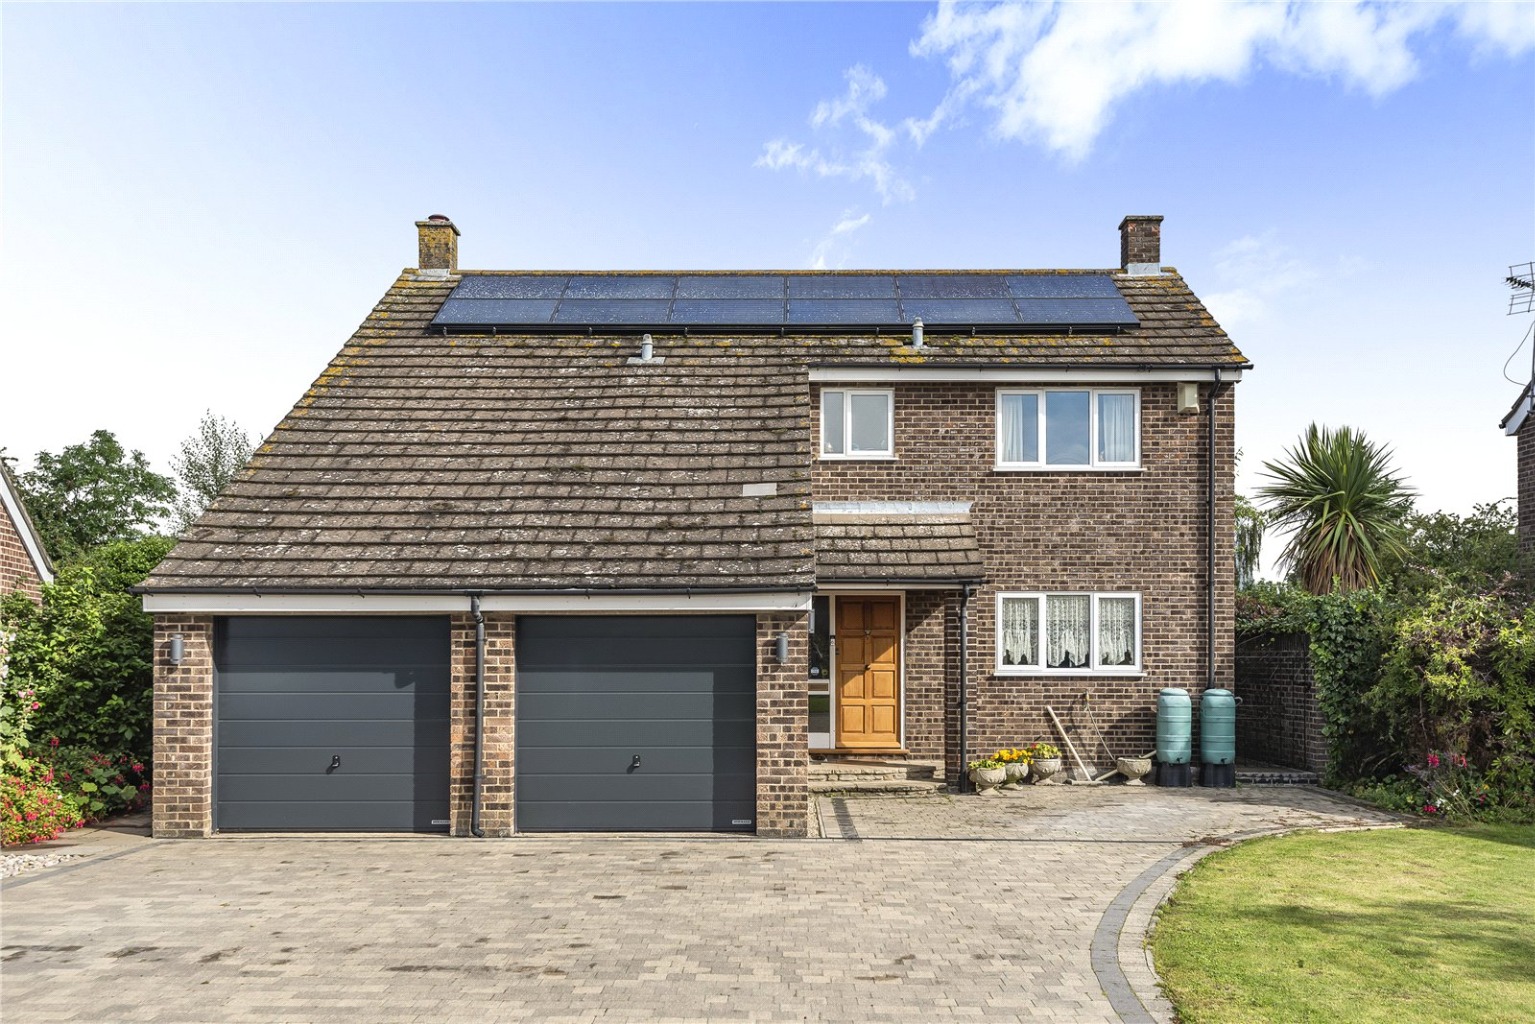 4 bed detached house for sale in Mill Road, Cambridge - Property Image 1